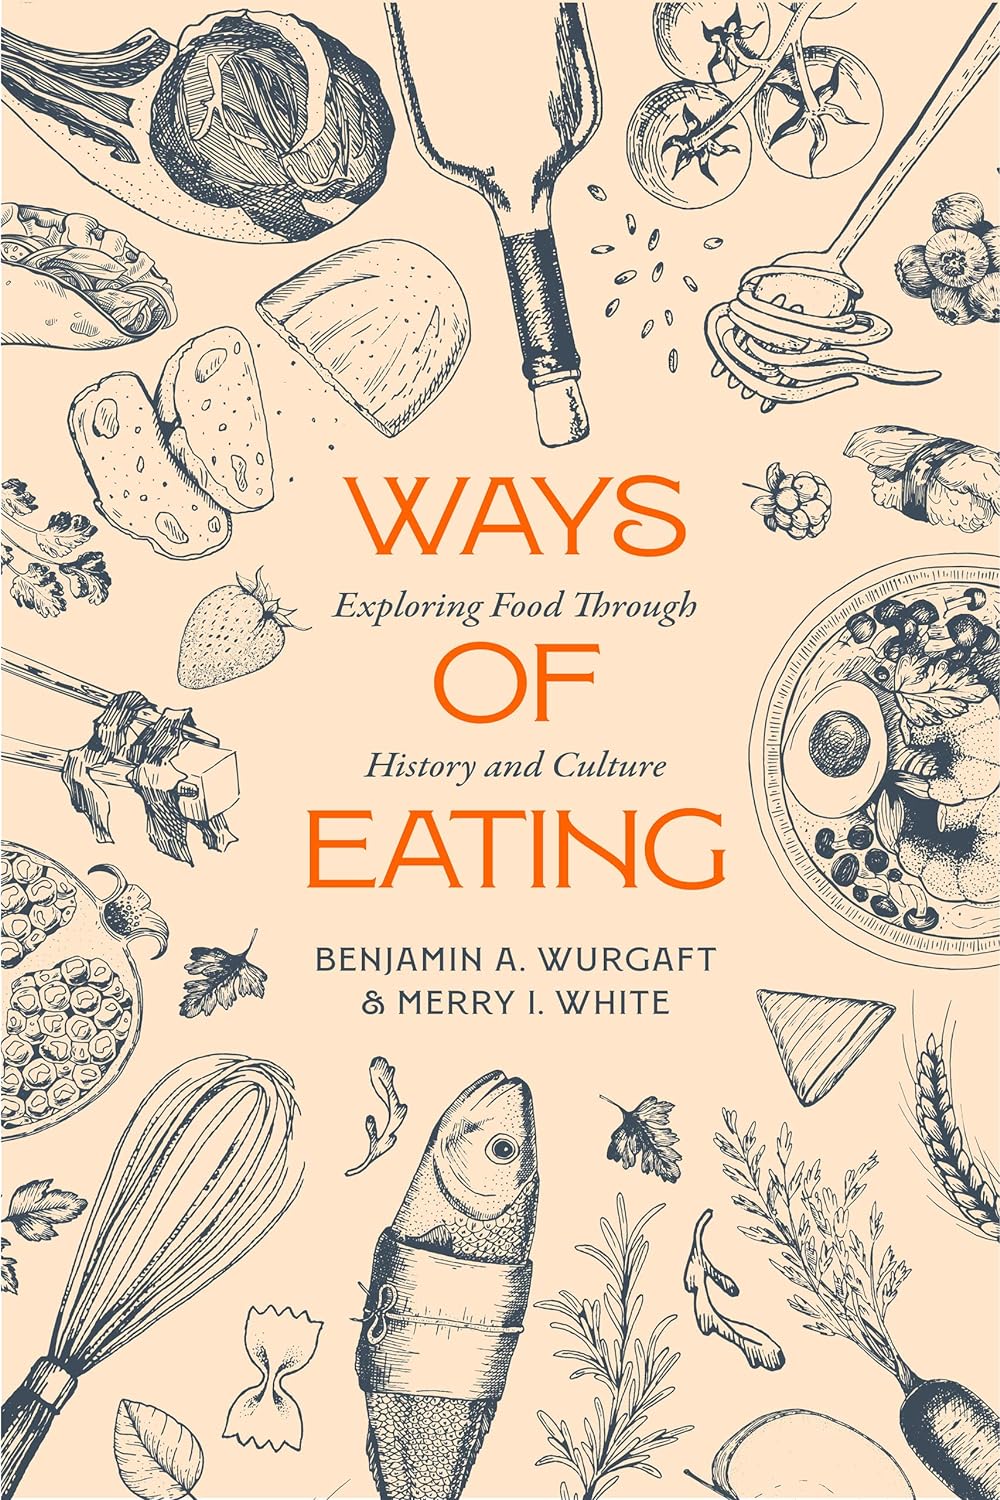 Ways of Eating: Exploring Food through History and Culture - Volume 81 California Studies in Food and Culture (Benjamin Aldes Wurgaft, Merry White)